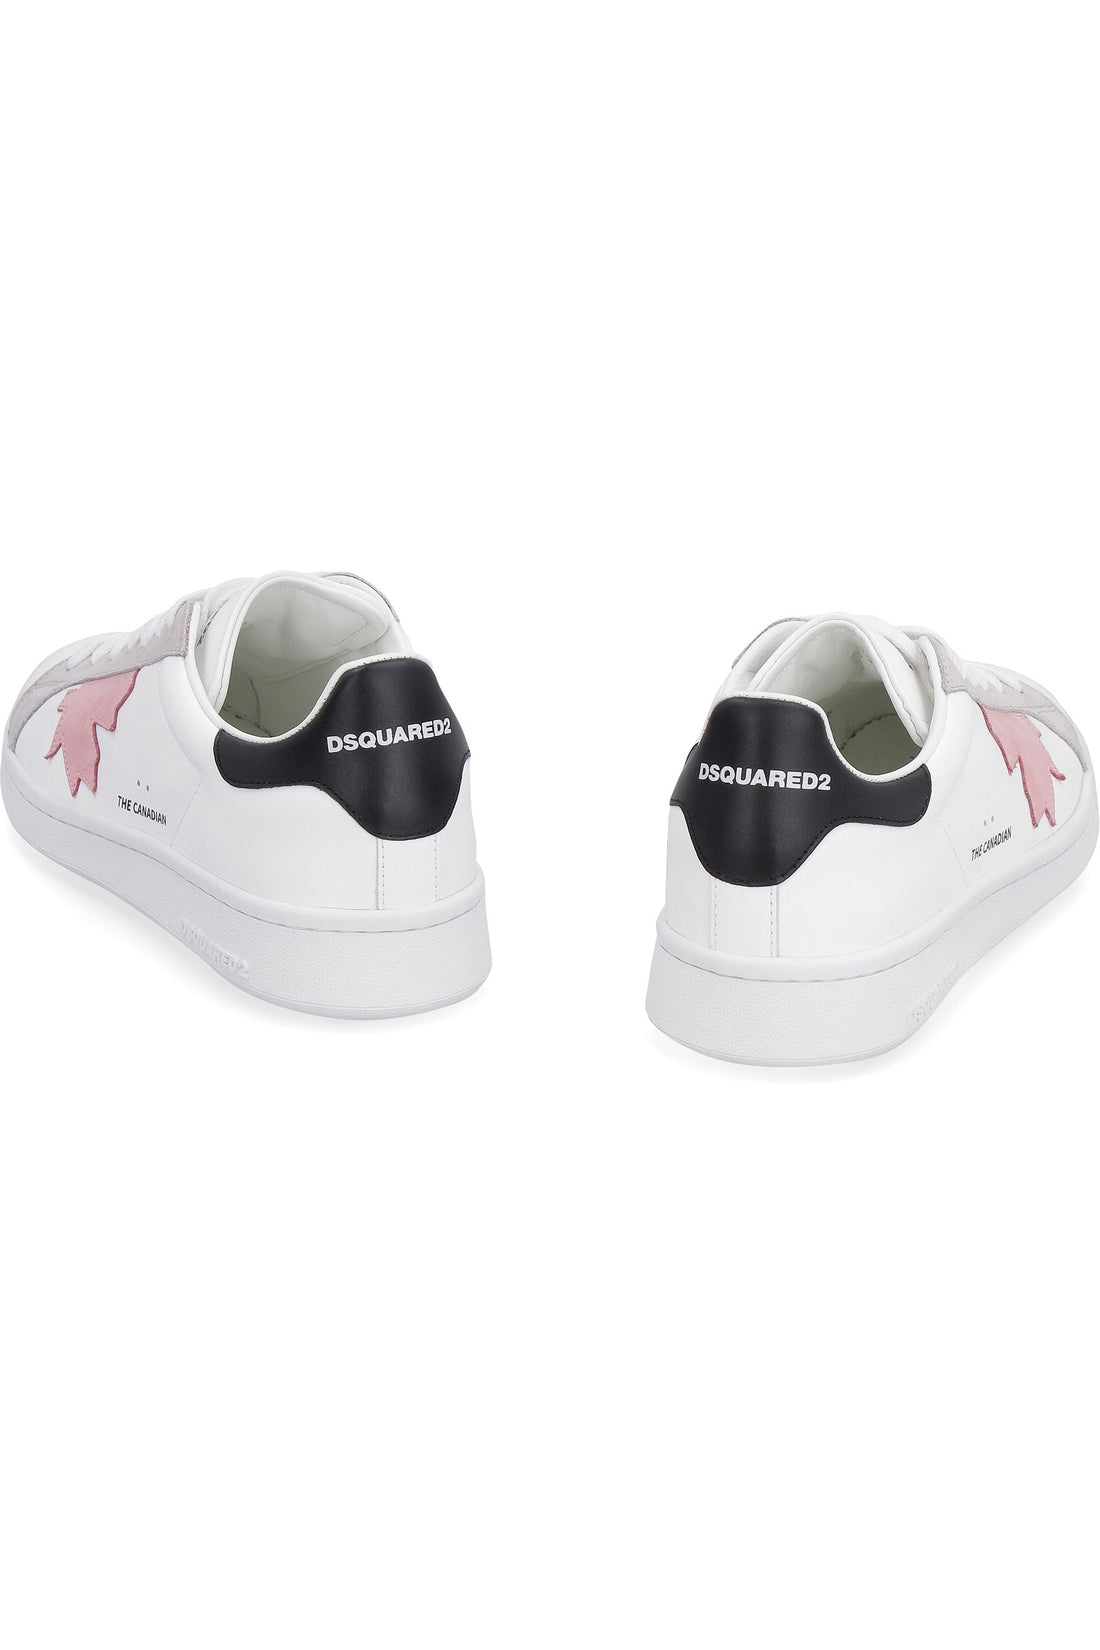 Dsquared2-OUTLET-SALE-Boxer leather sneakers-ARCHIVIST